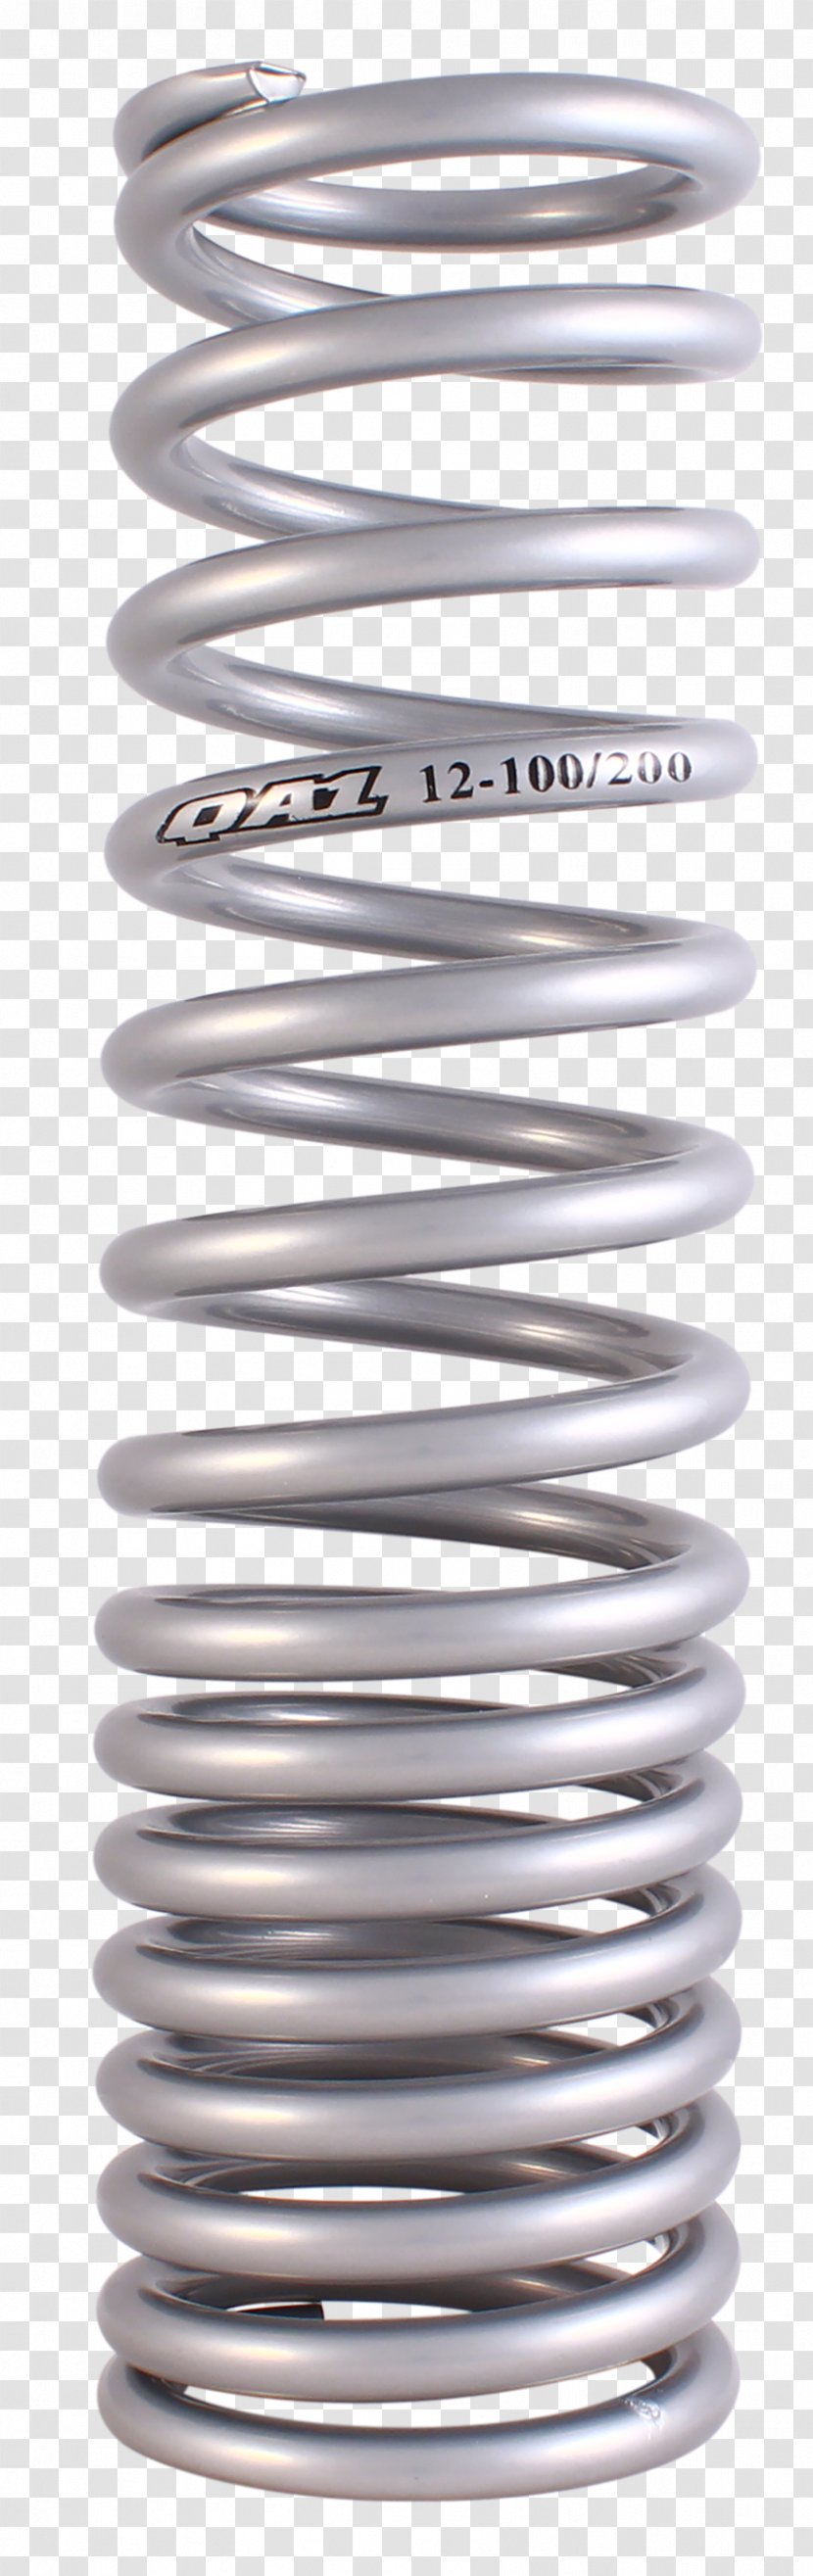 QA1 12-175/350 Coil Springs Coilover Suspension - Motor Vehicle Shock Absorbers - Spring Transparent PNG